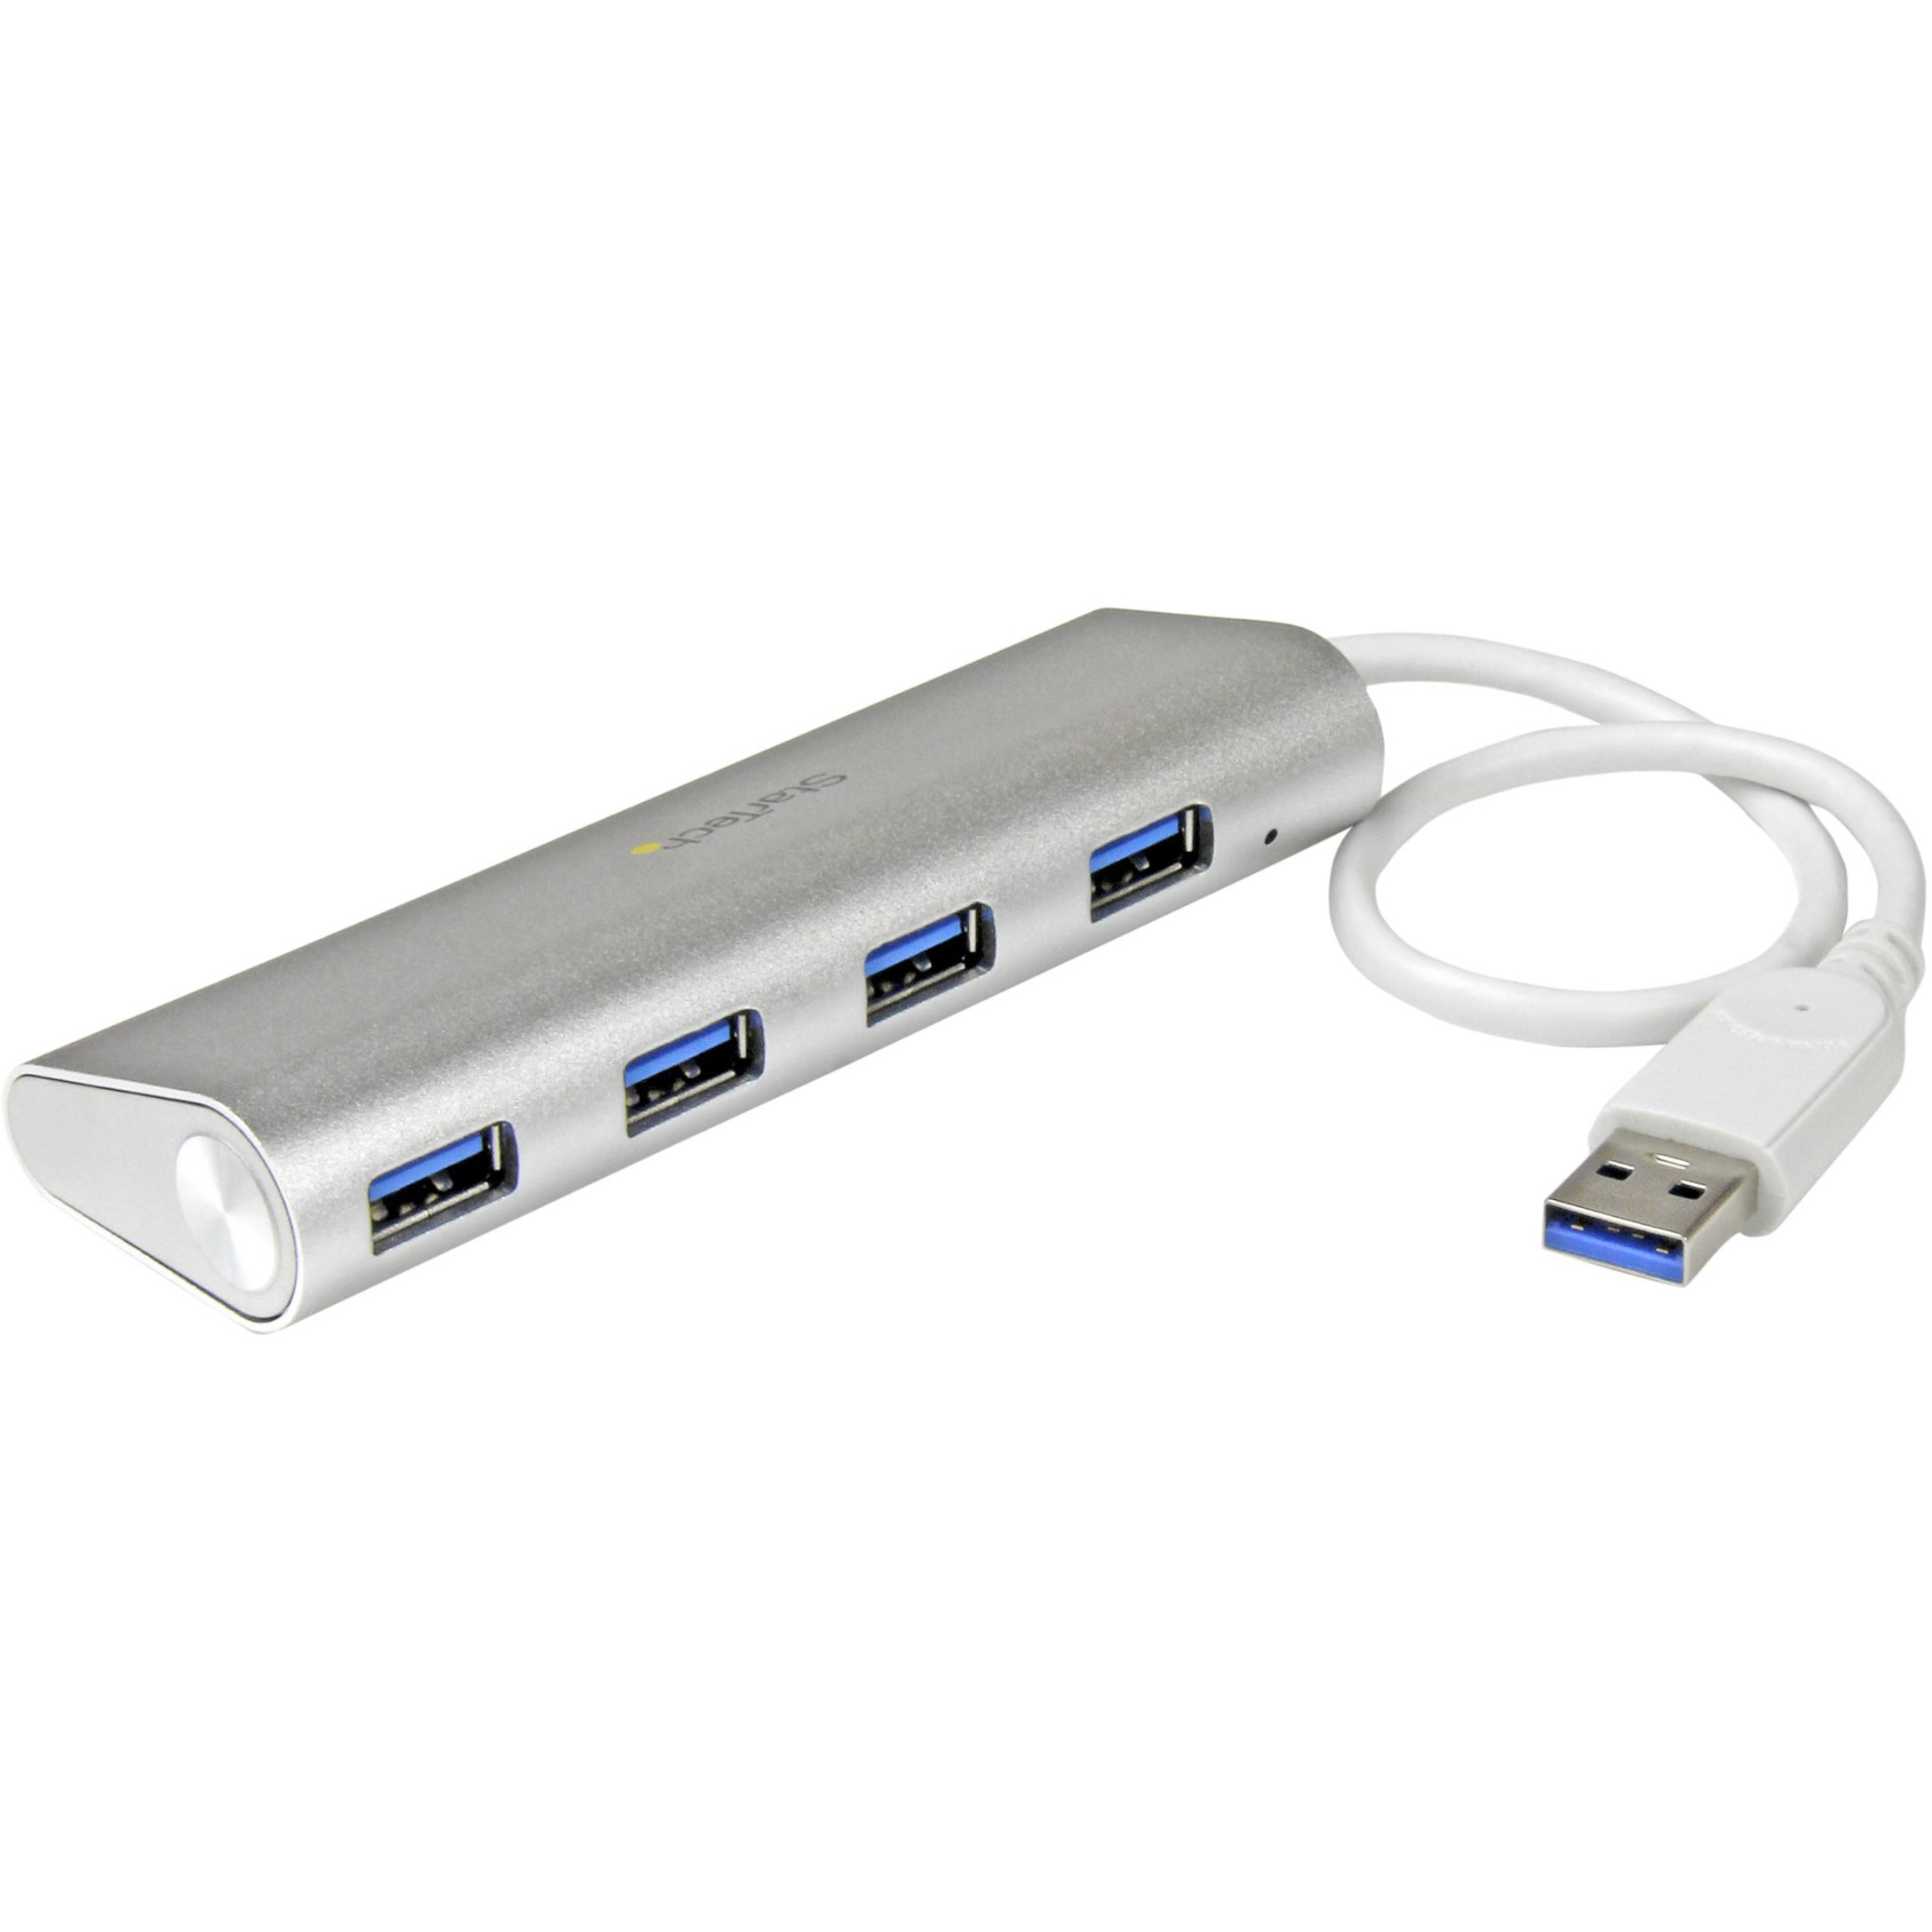 Startech .com 4 Port Portable USB 3.0 Hub with Built-in CableAluminum and Compact USB HubAdd four USB 3.0 (5Gbps) ports to your MacBook u… ST43004UA